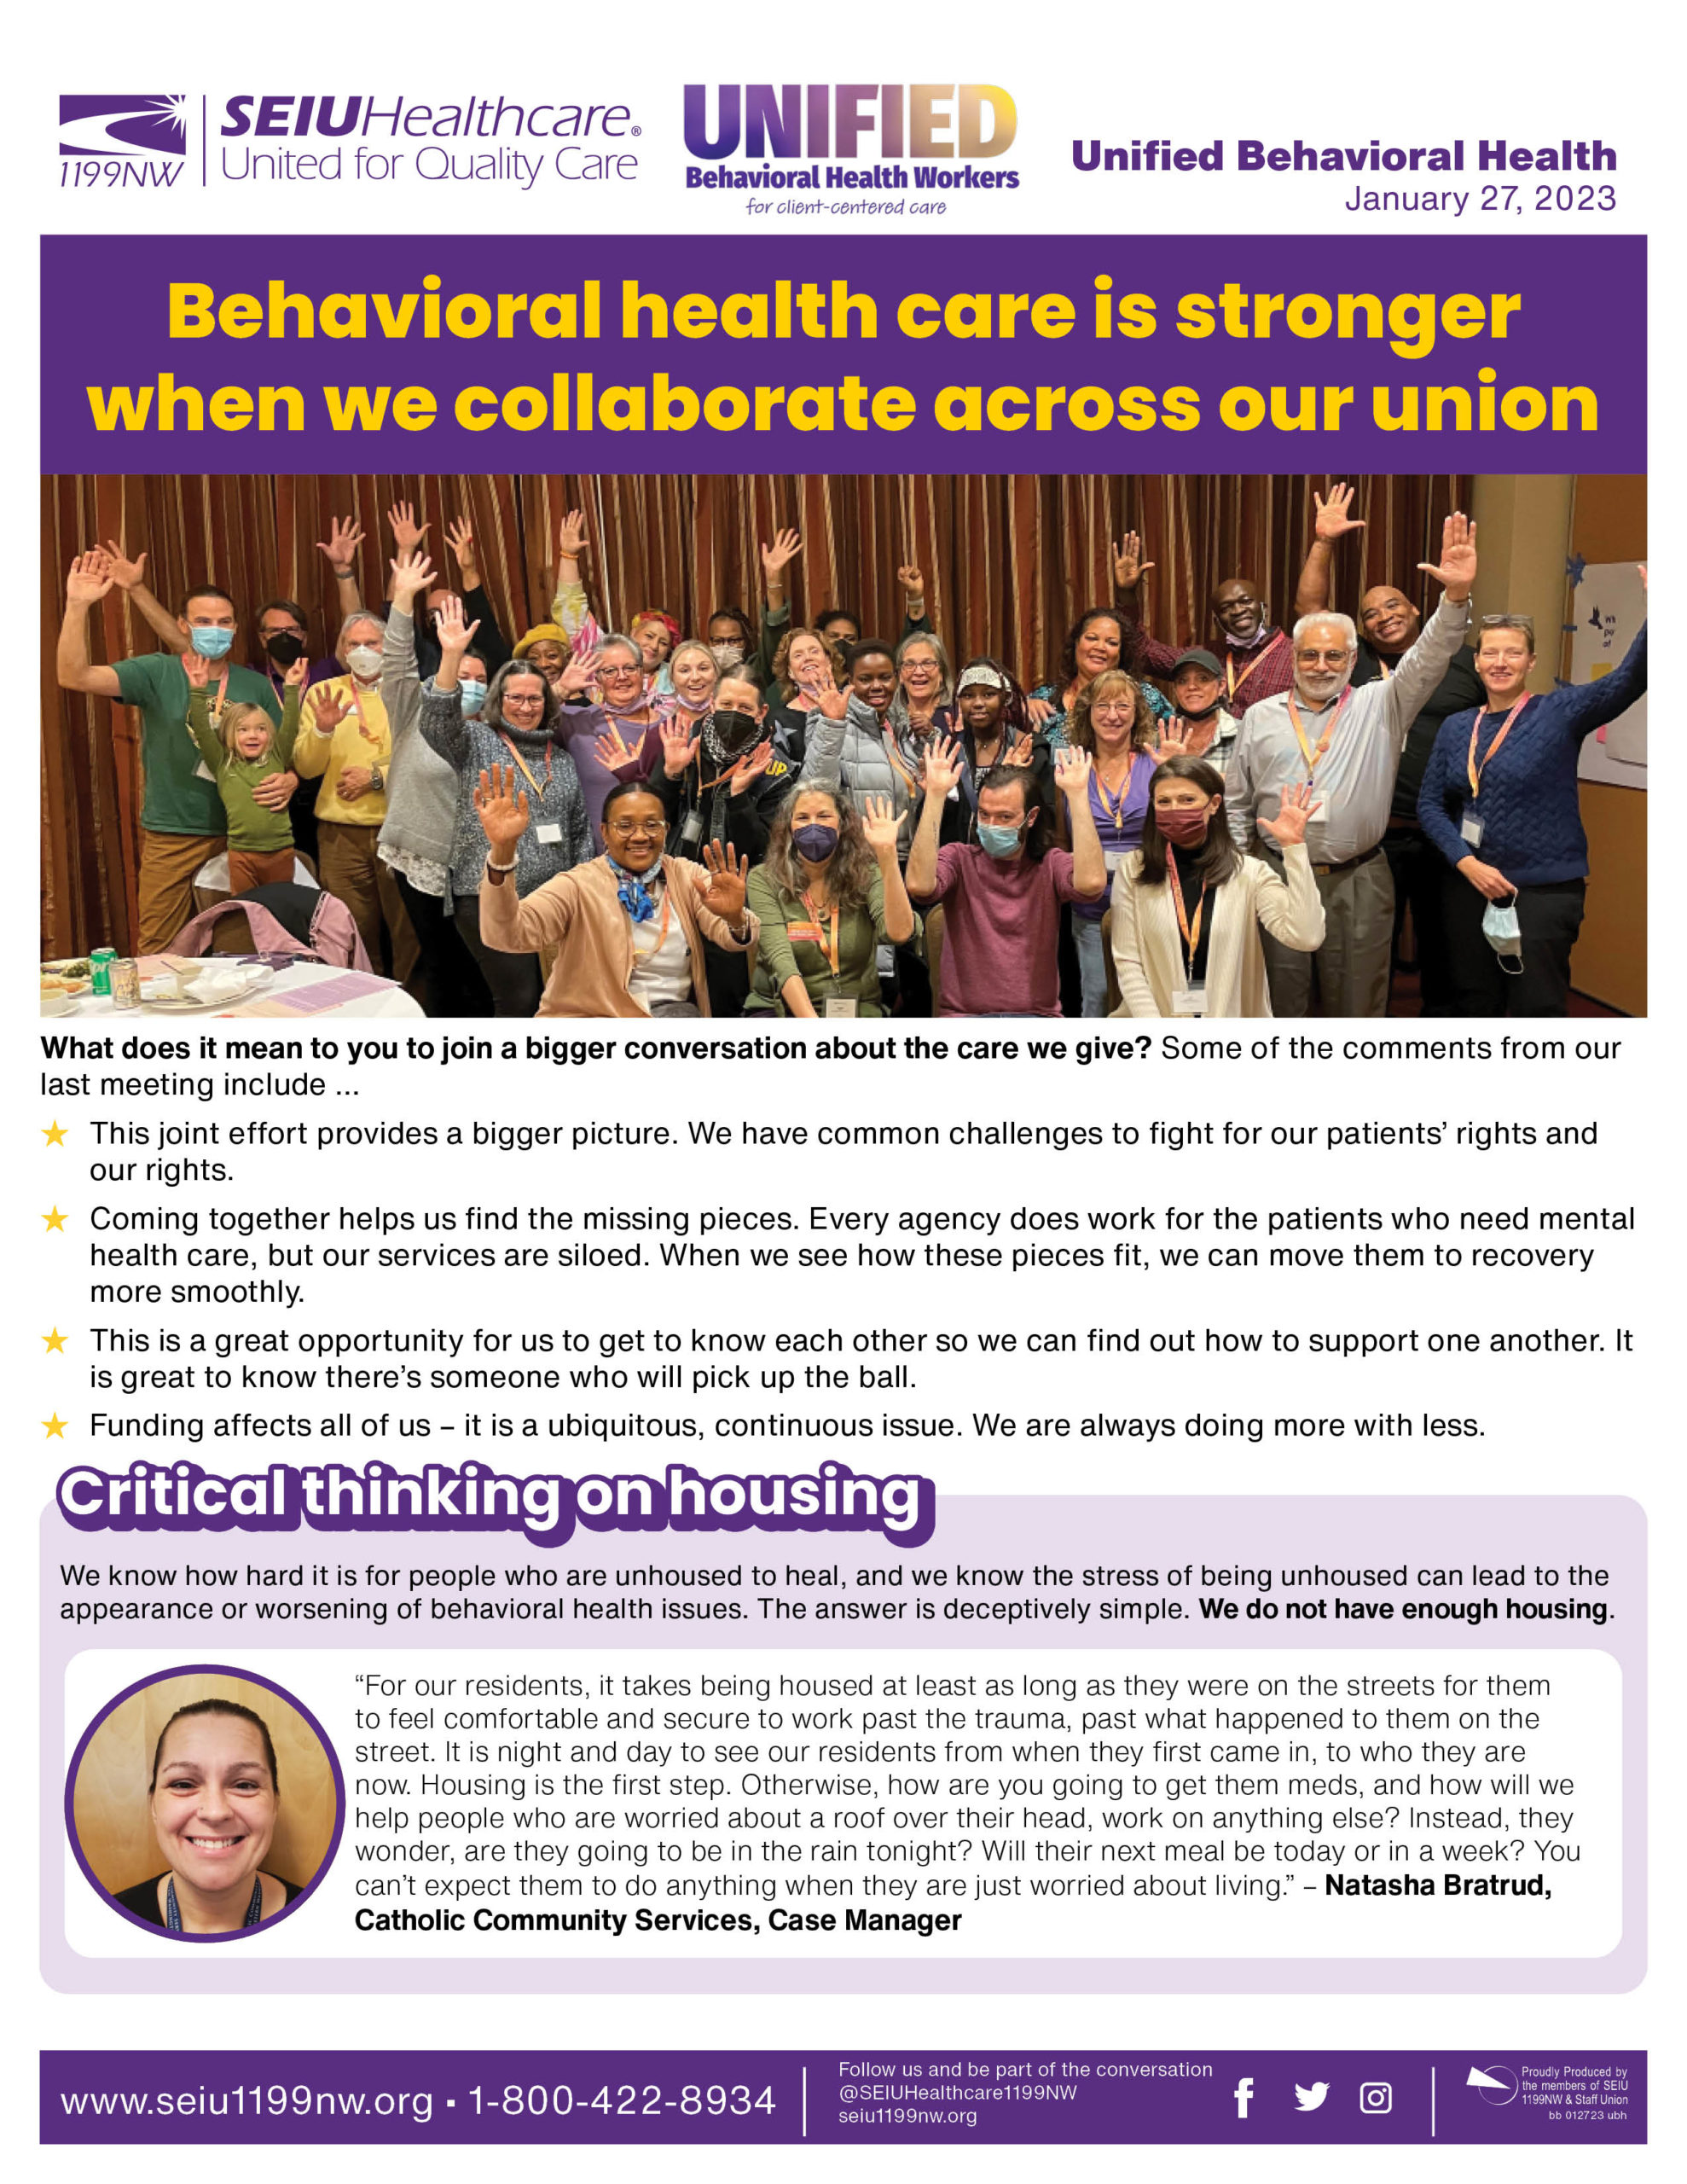 Behavioral health care is stronger when we collaborate across our union